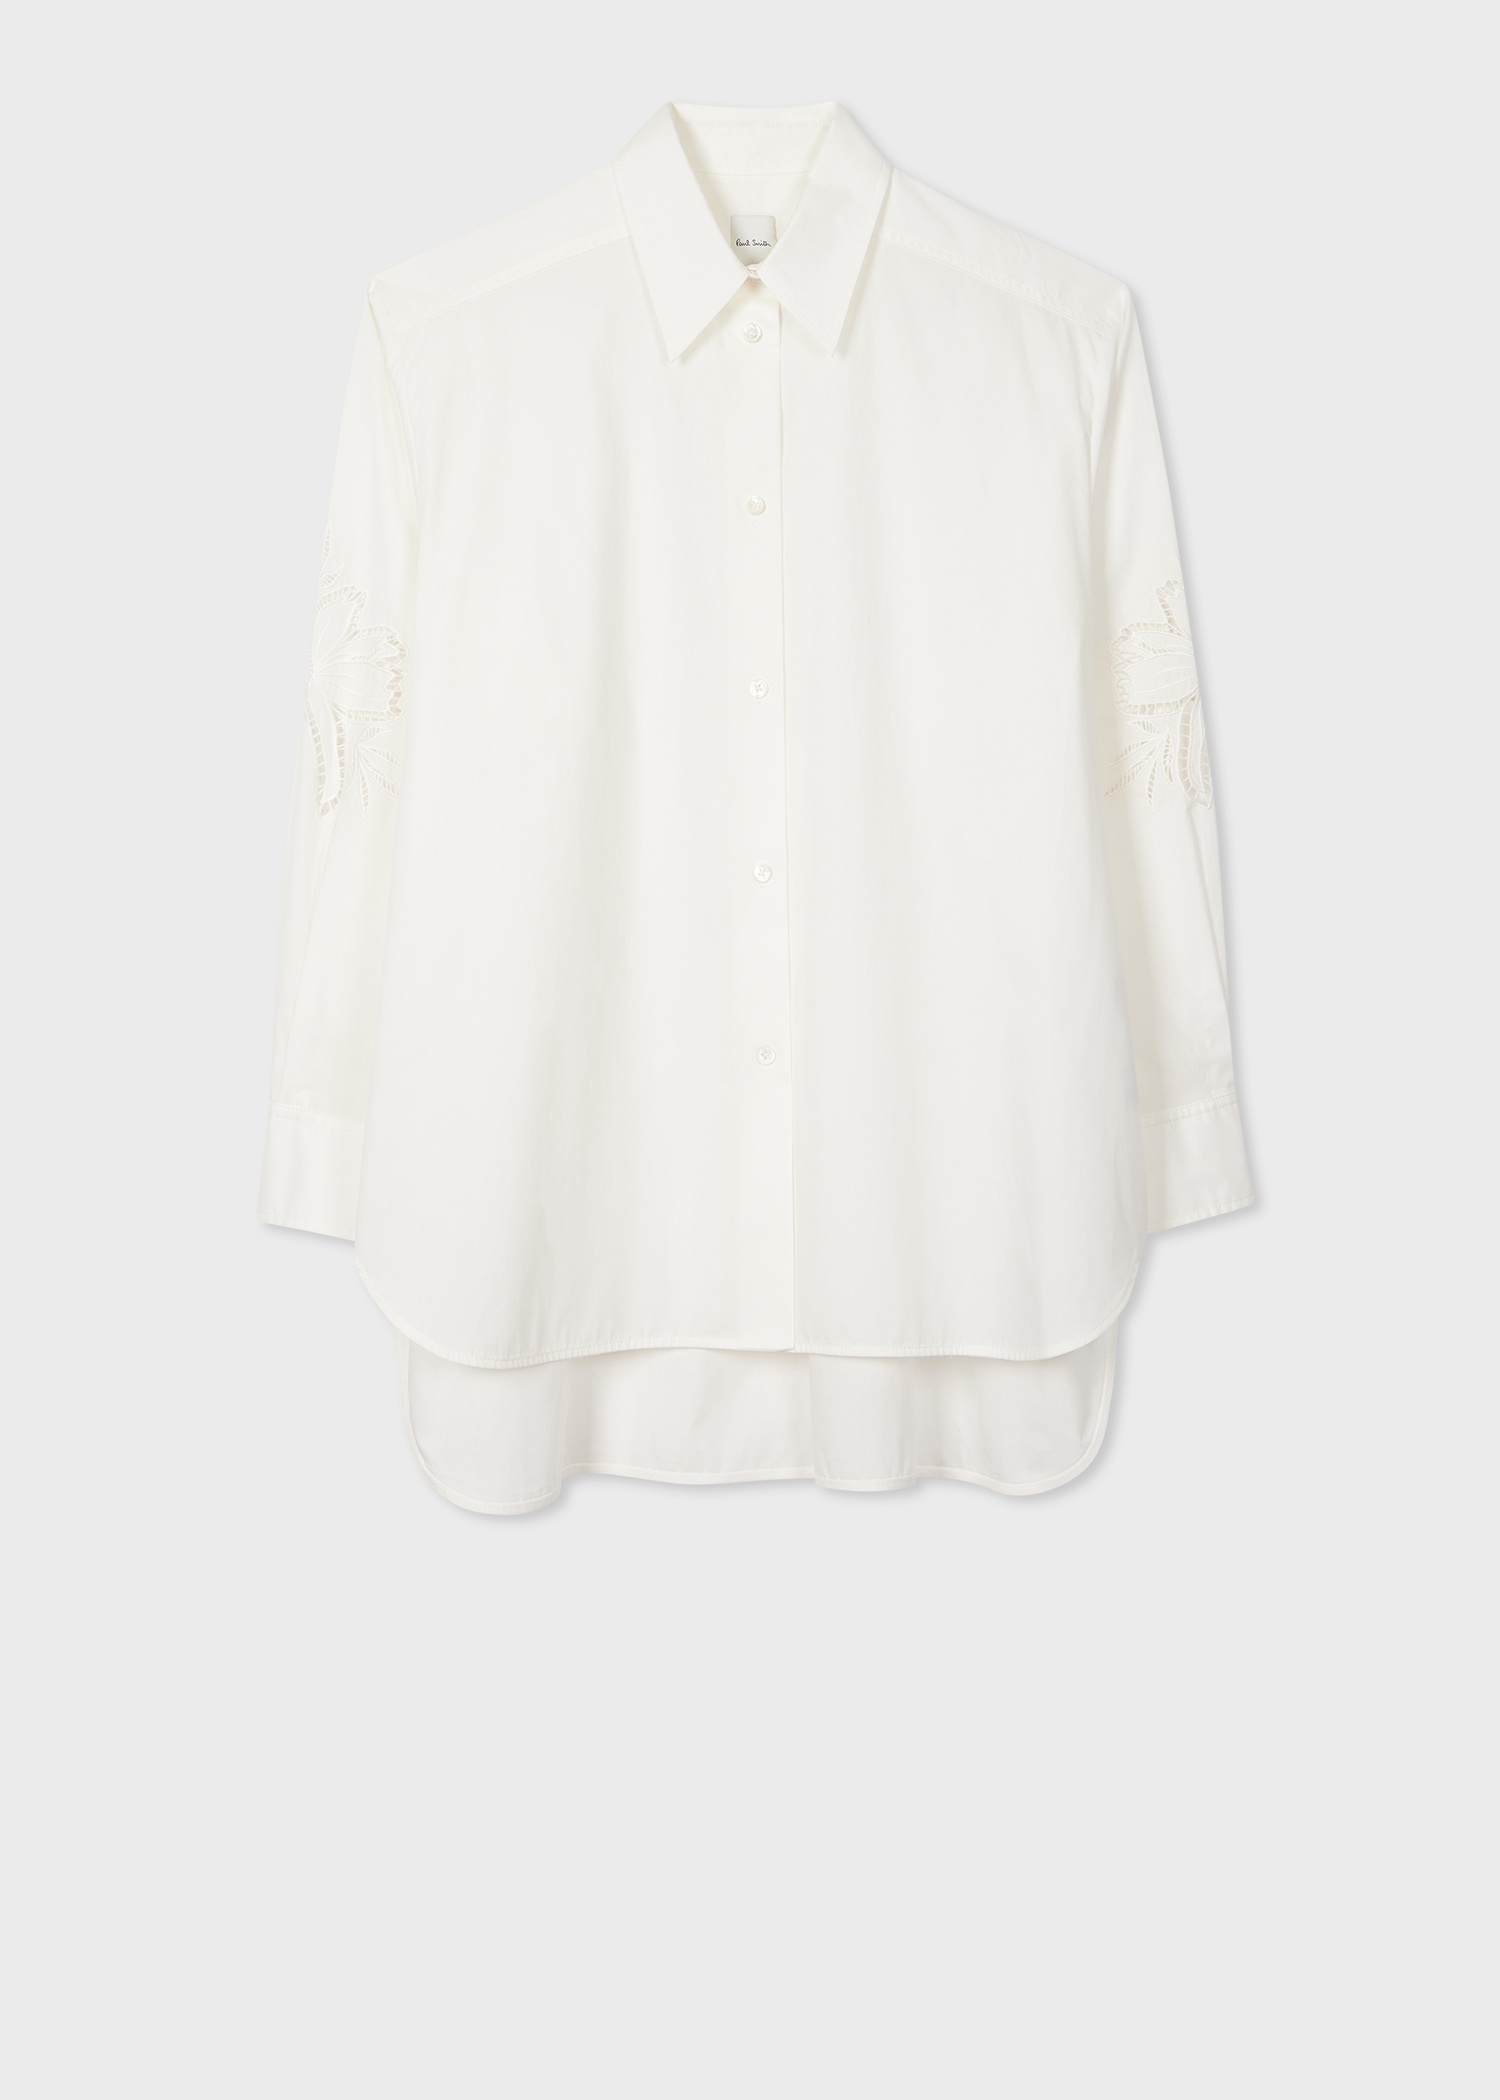 Women's White Cotton Shirt with Cutout Sleeves - 1